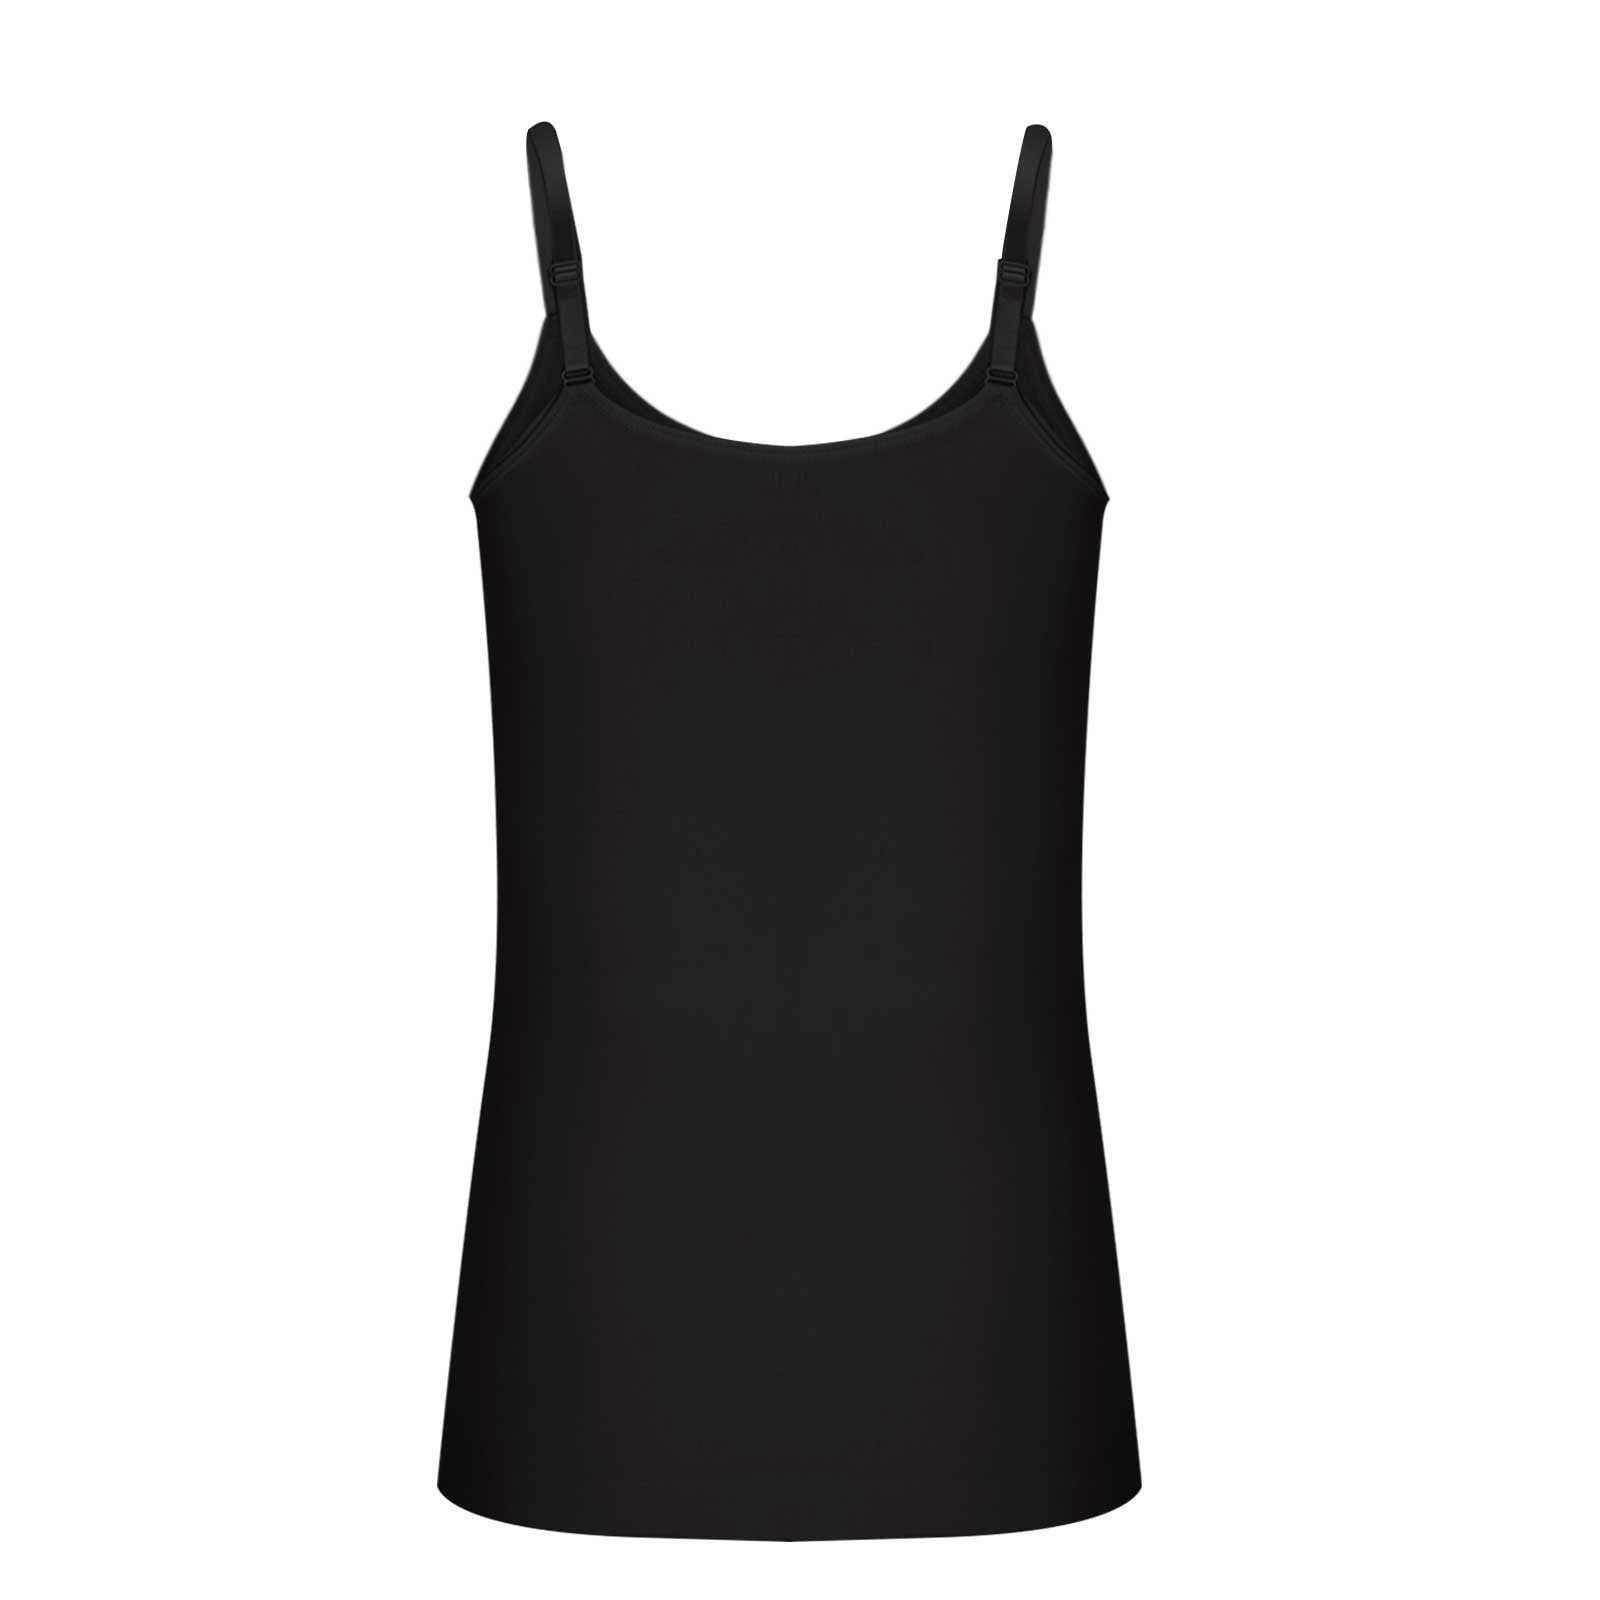 Comfneat Women's Basic Tanks Comfy Top (Black 4-Pack, S) at